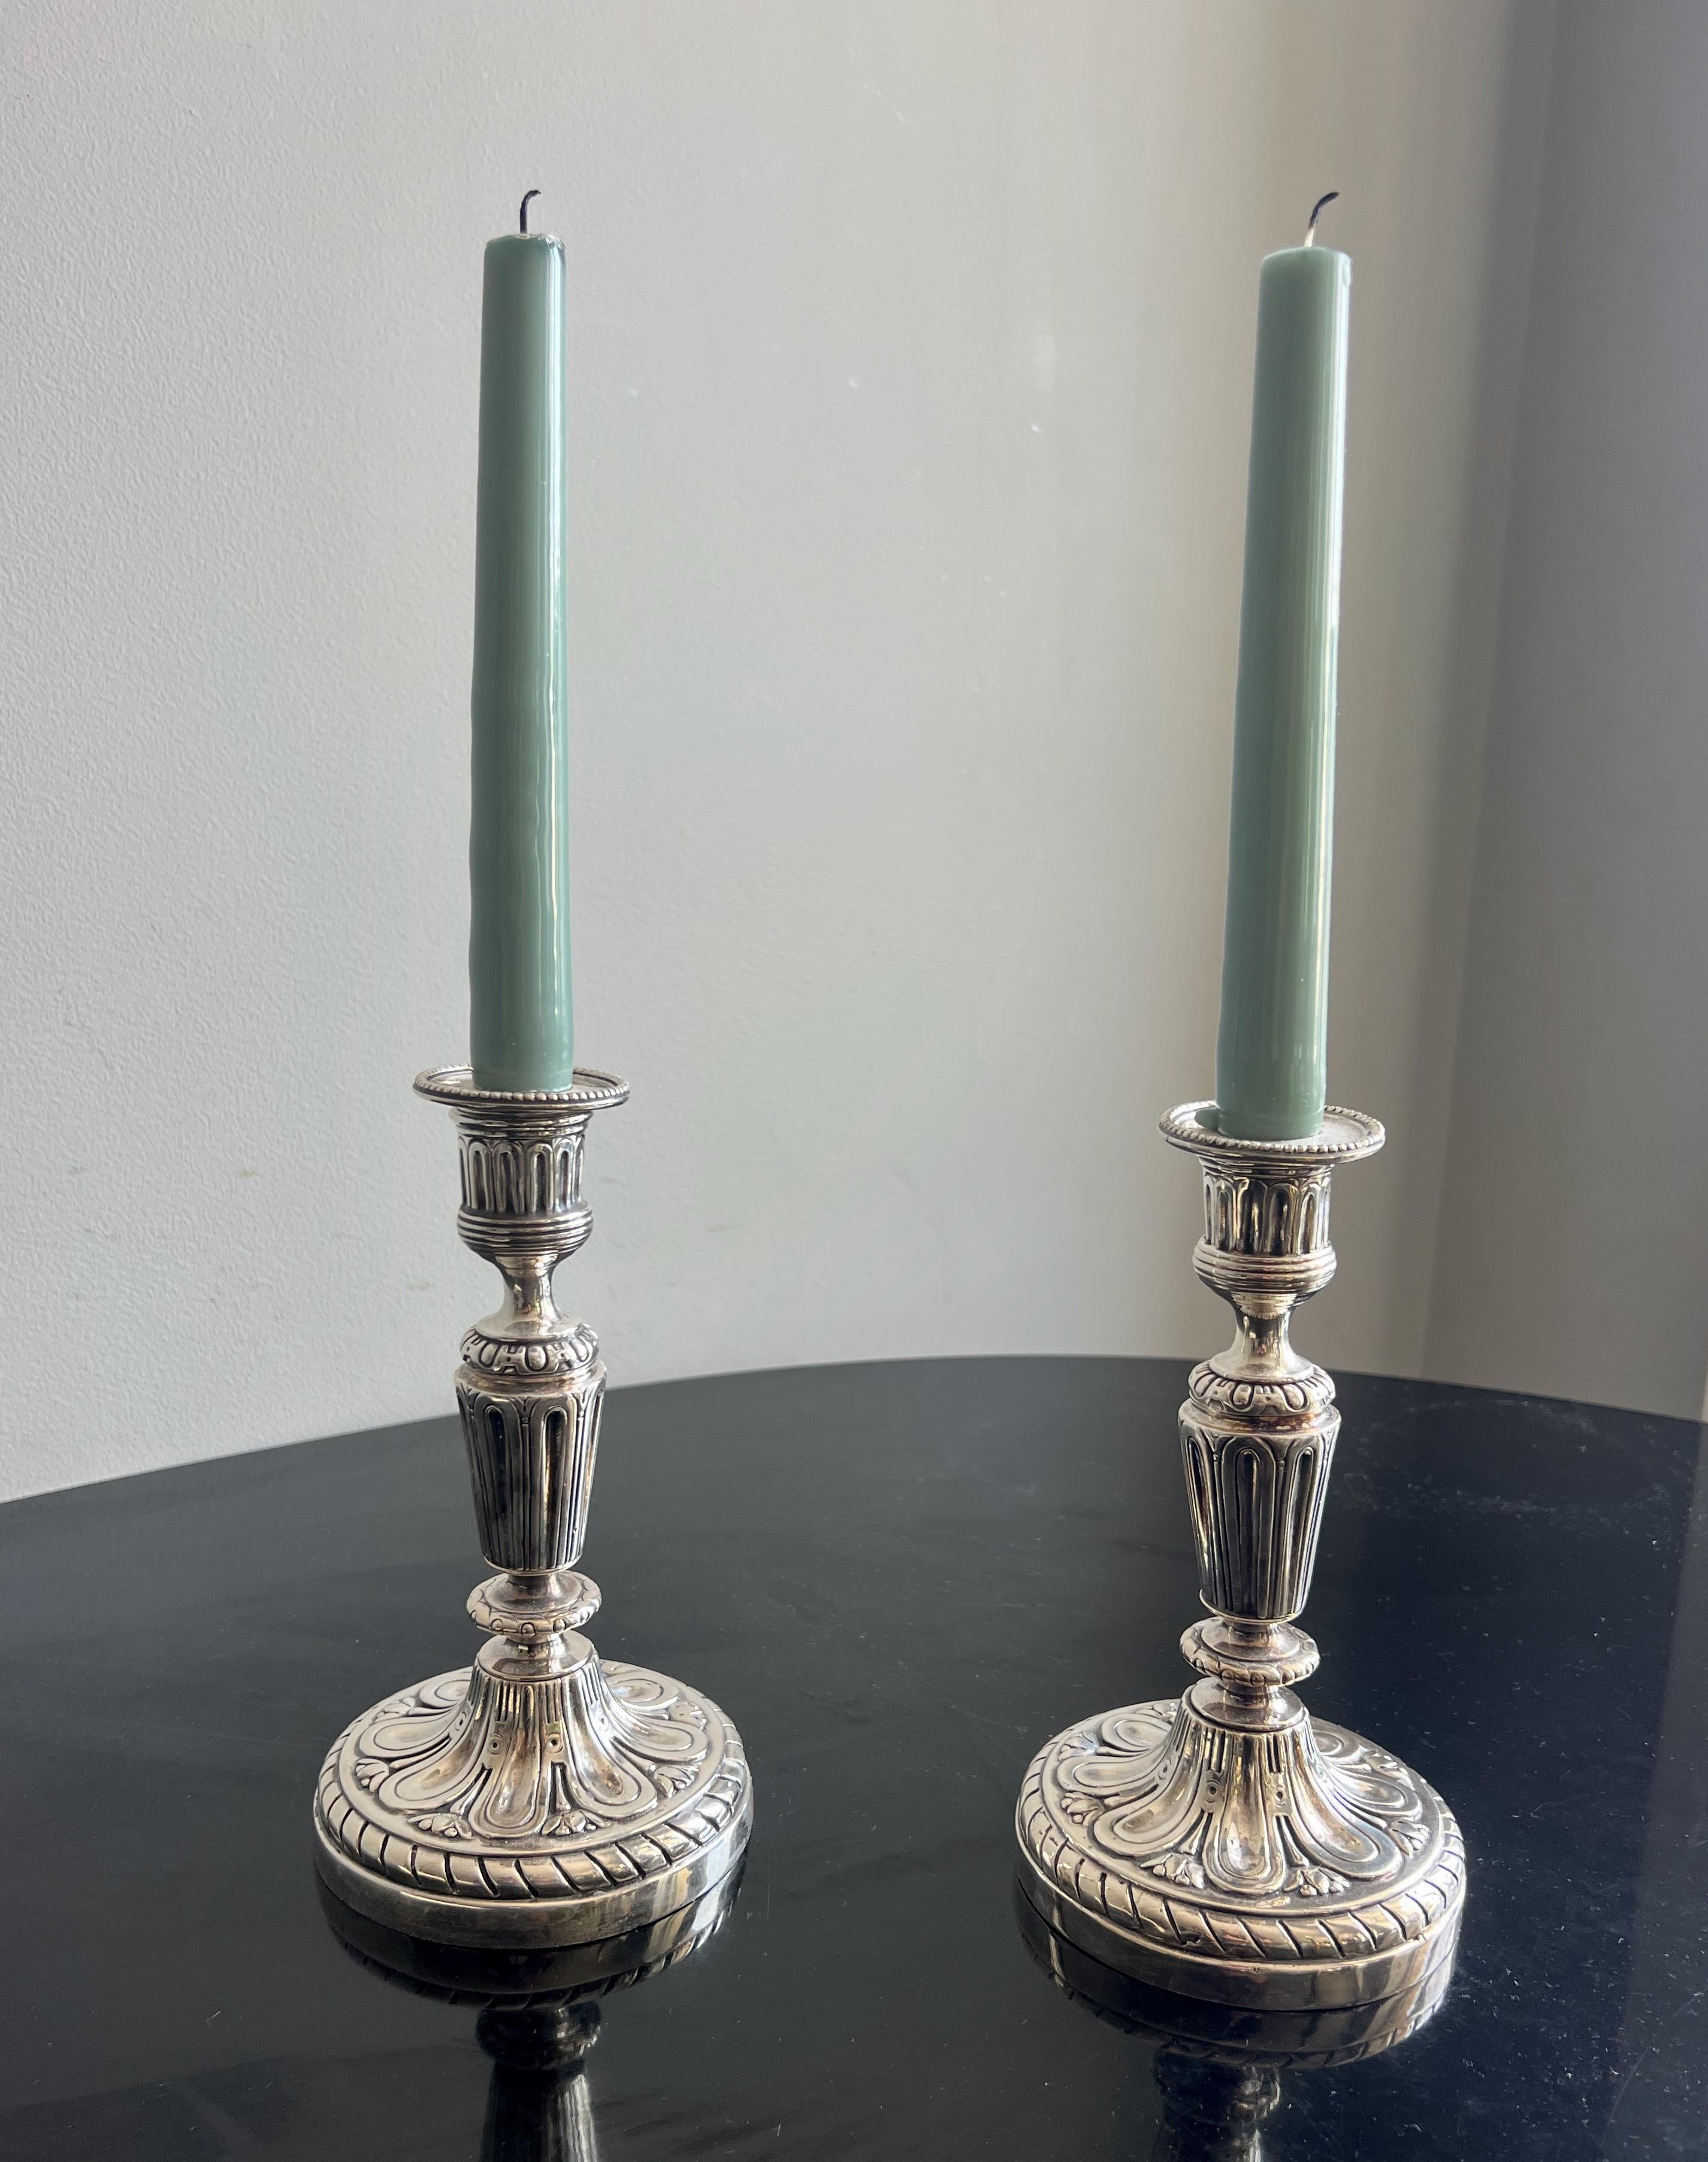 Silvered Pair of antique silver-plated Louis XVI candlesticks. 18th century